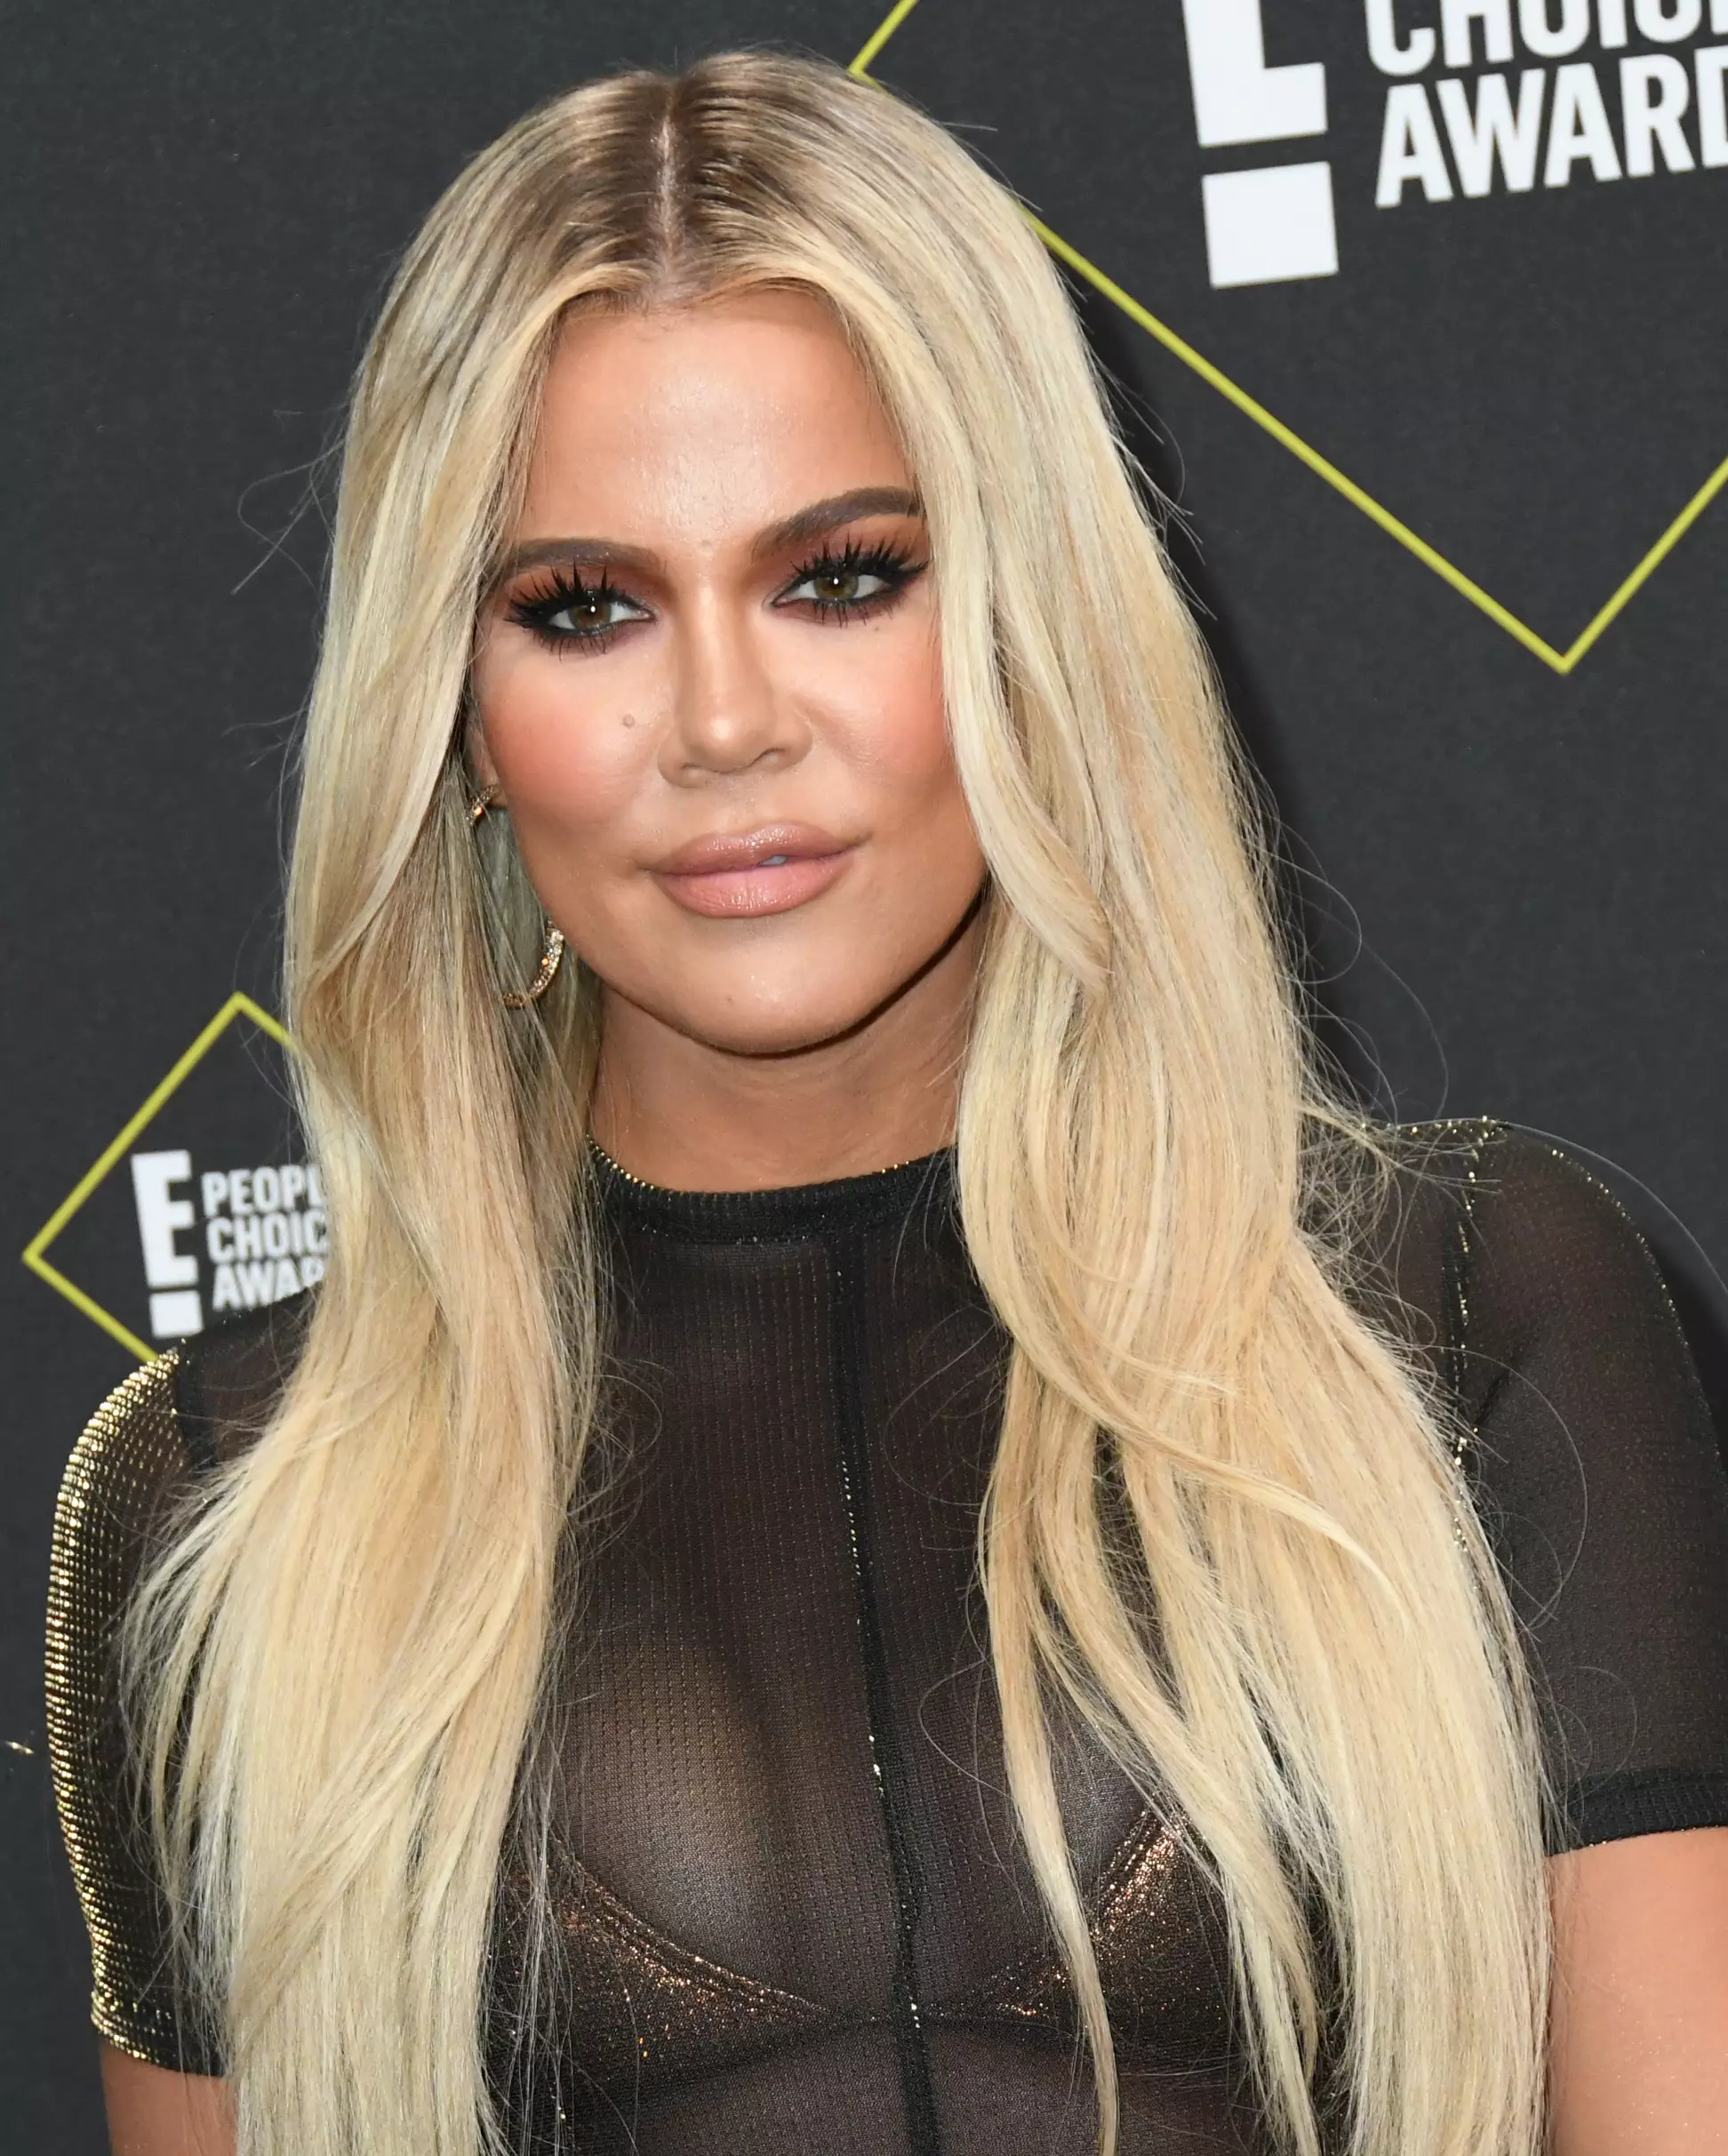 Photo of Khloé from November 2019.